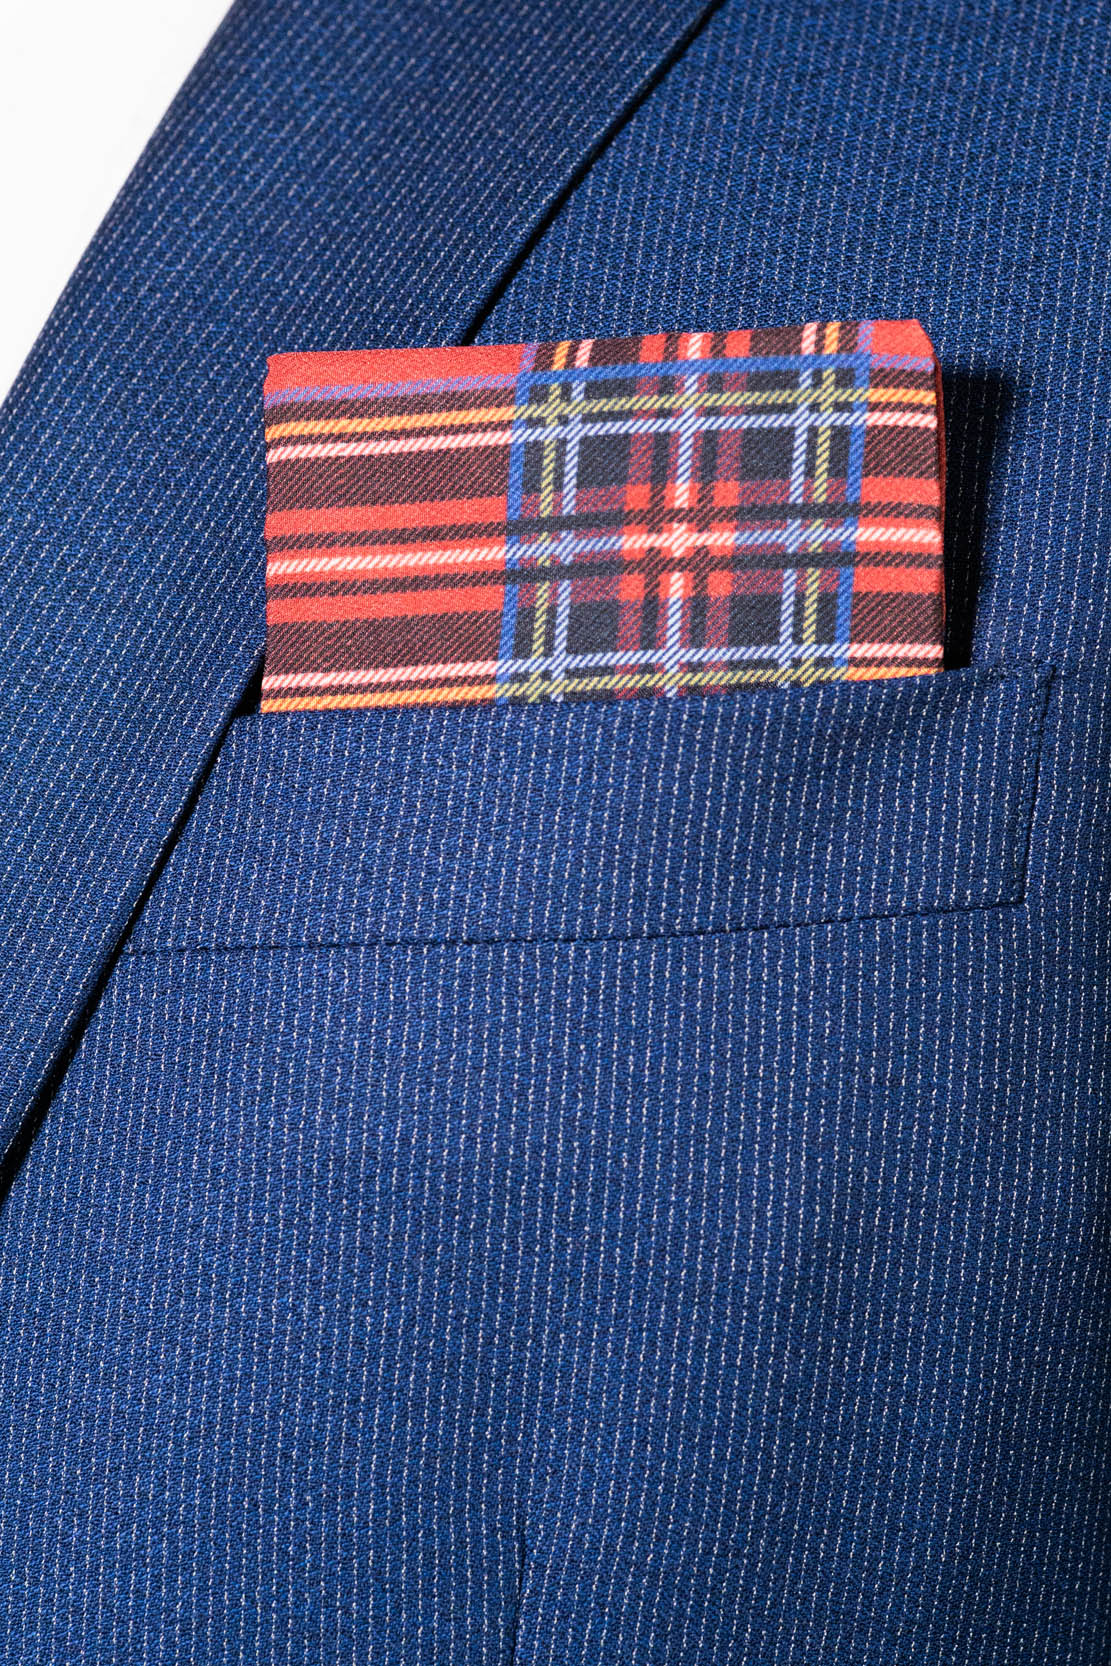 RARE CUT's Red Zone Pocket Square Worn in a Suit Jacket